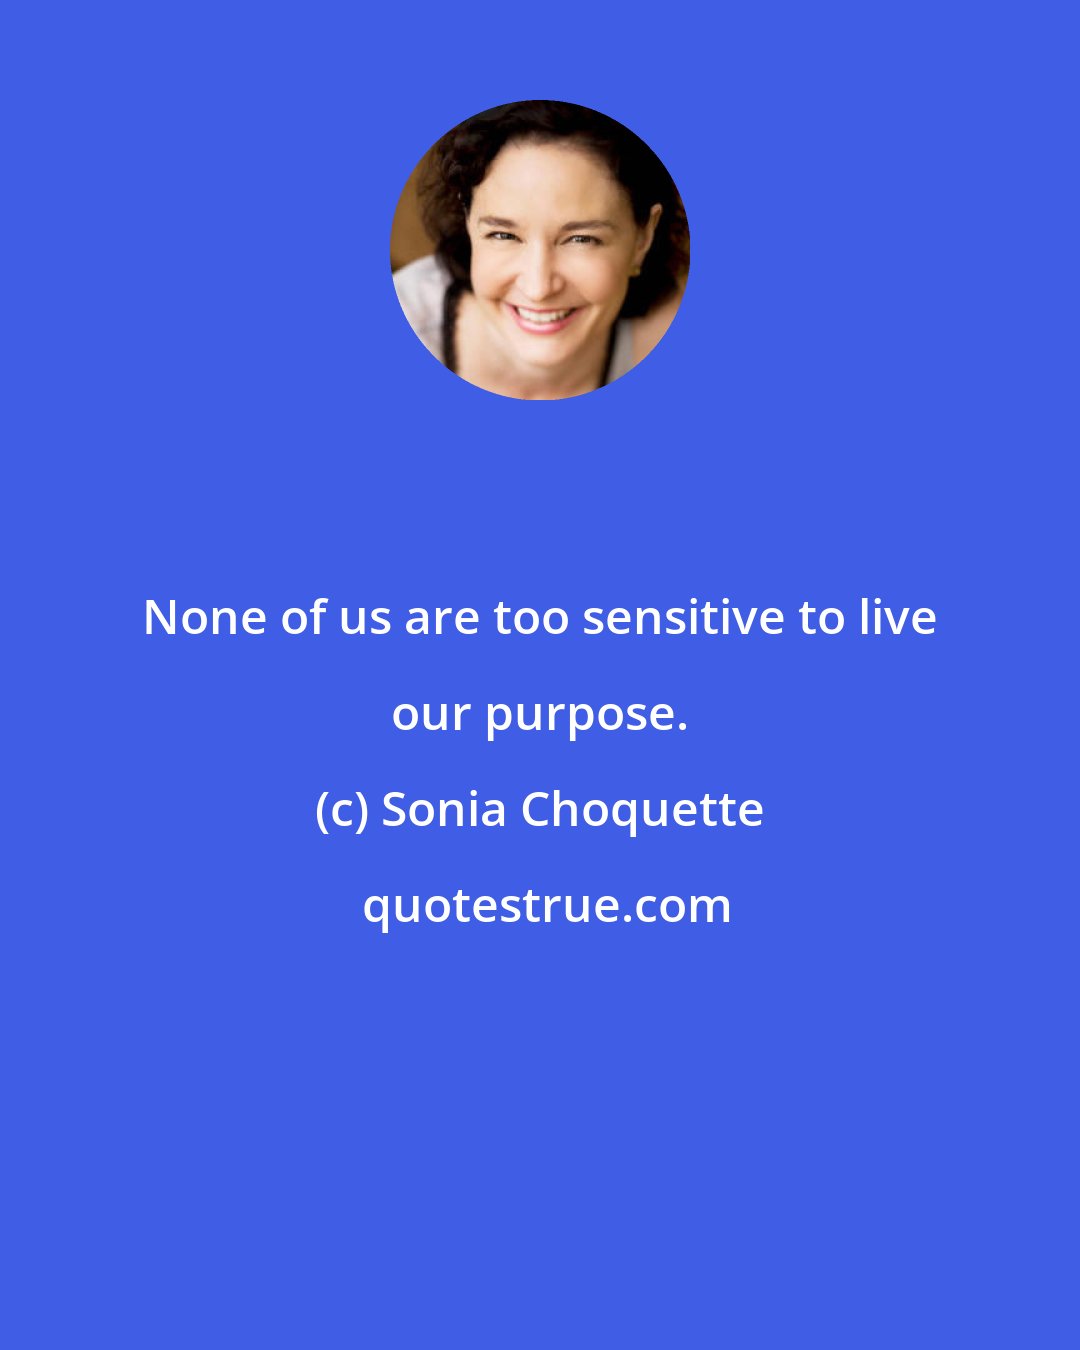 Sonia Choquette: None of us are too sensitive to live our purpose.